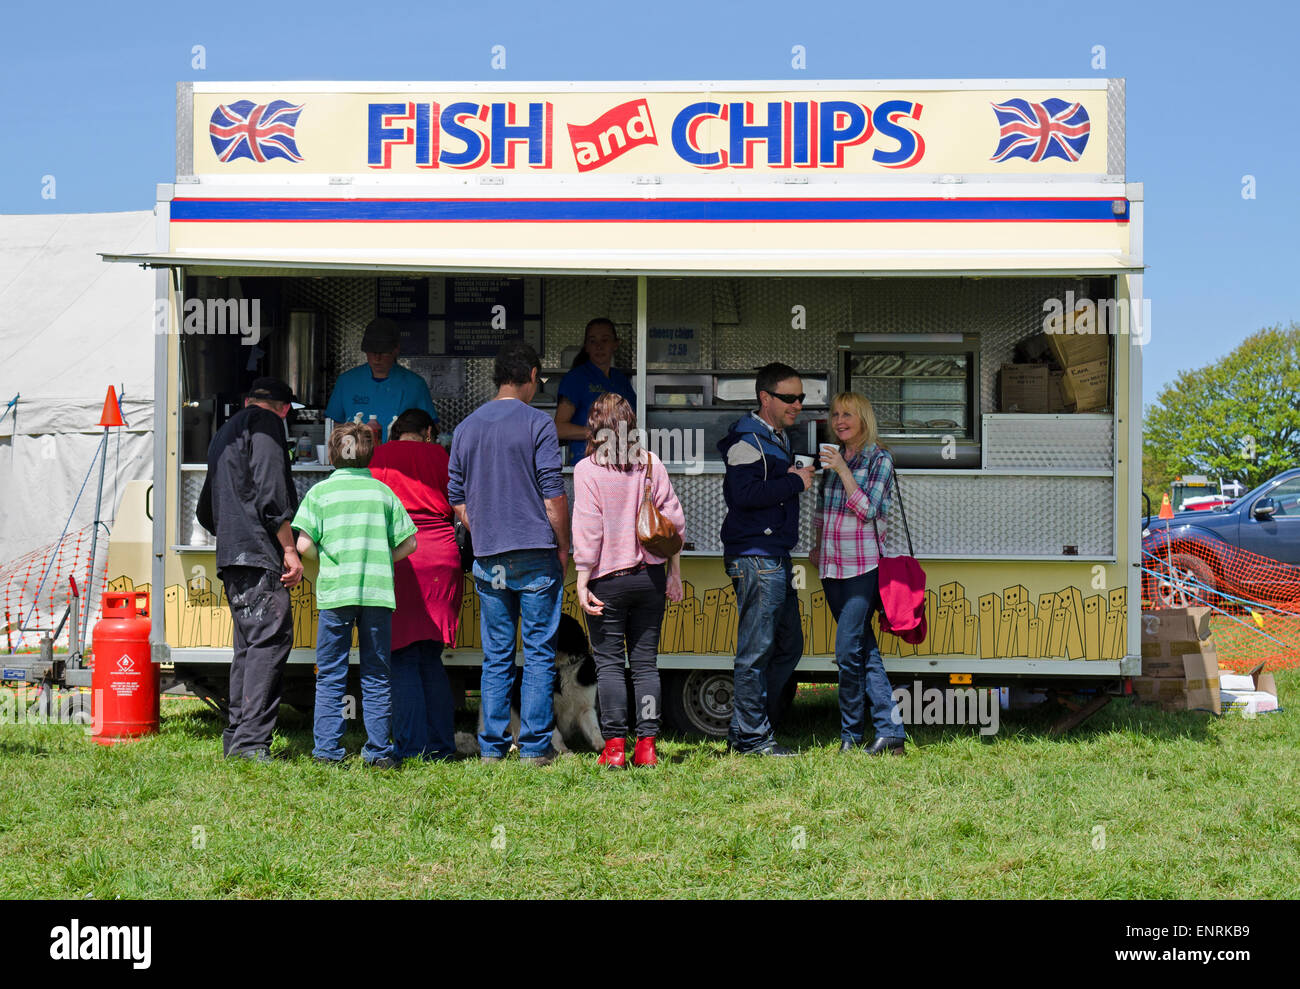 a takeaway fish and chips stall at a country fair in cornwall, uk Stock Photo